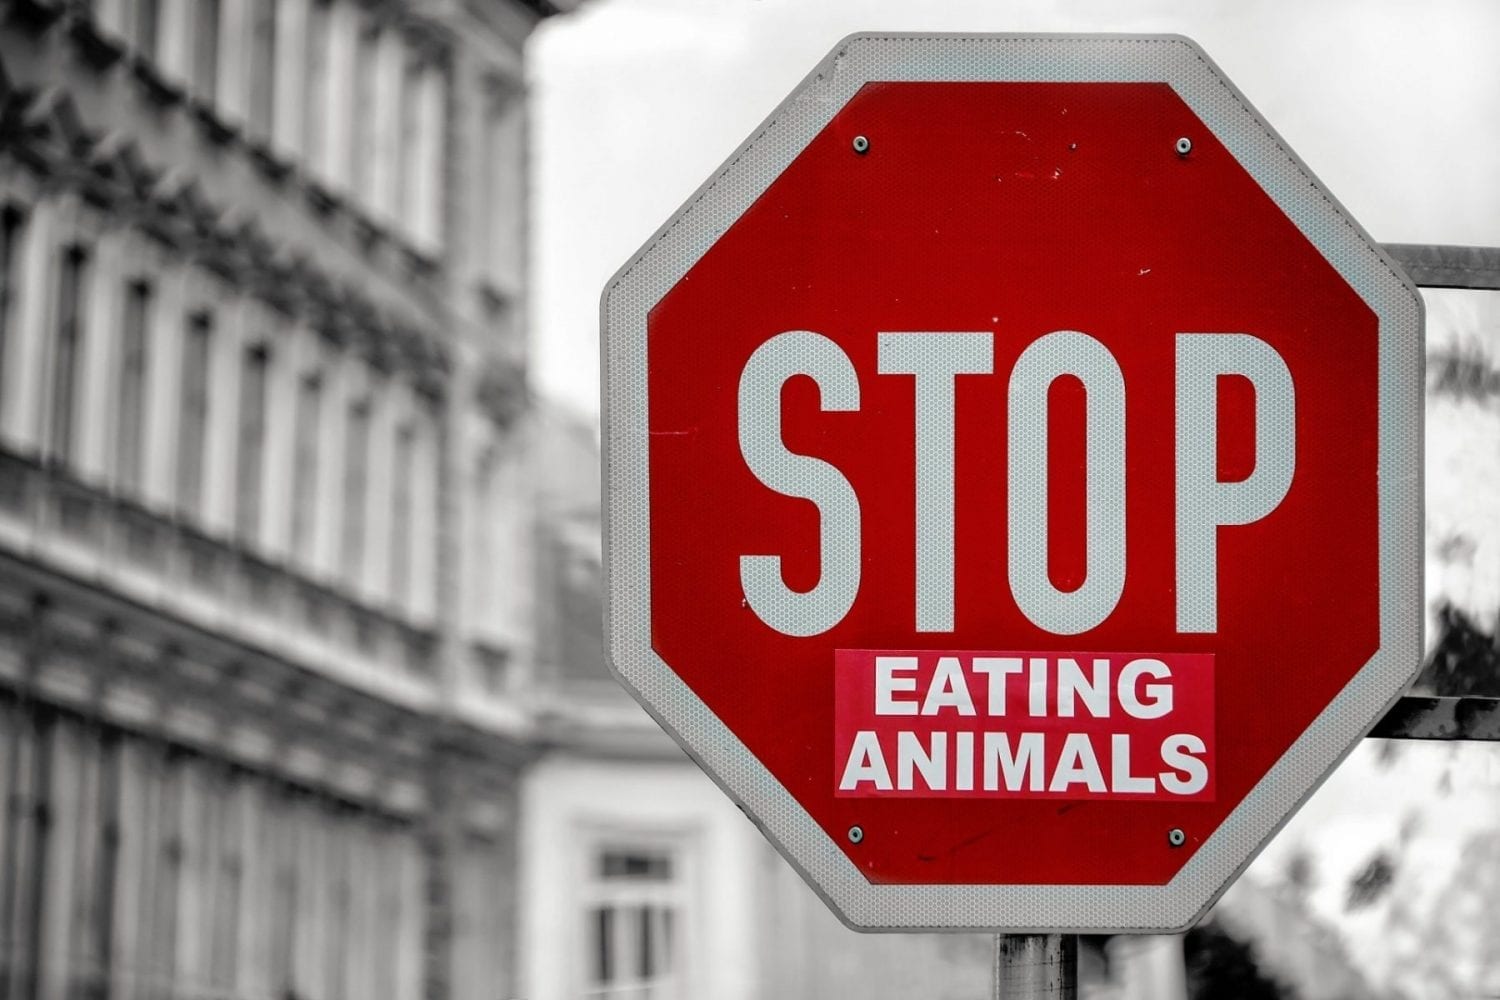 A "Stop" road sign, with the suffix "Eating animals" beneath it